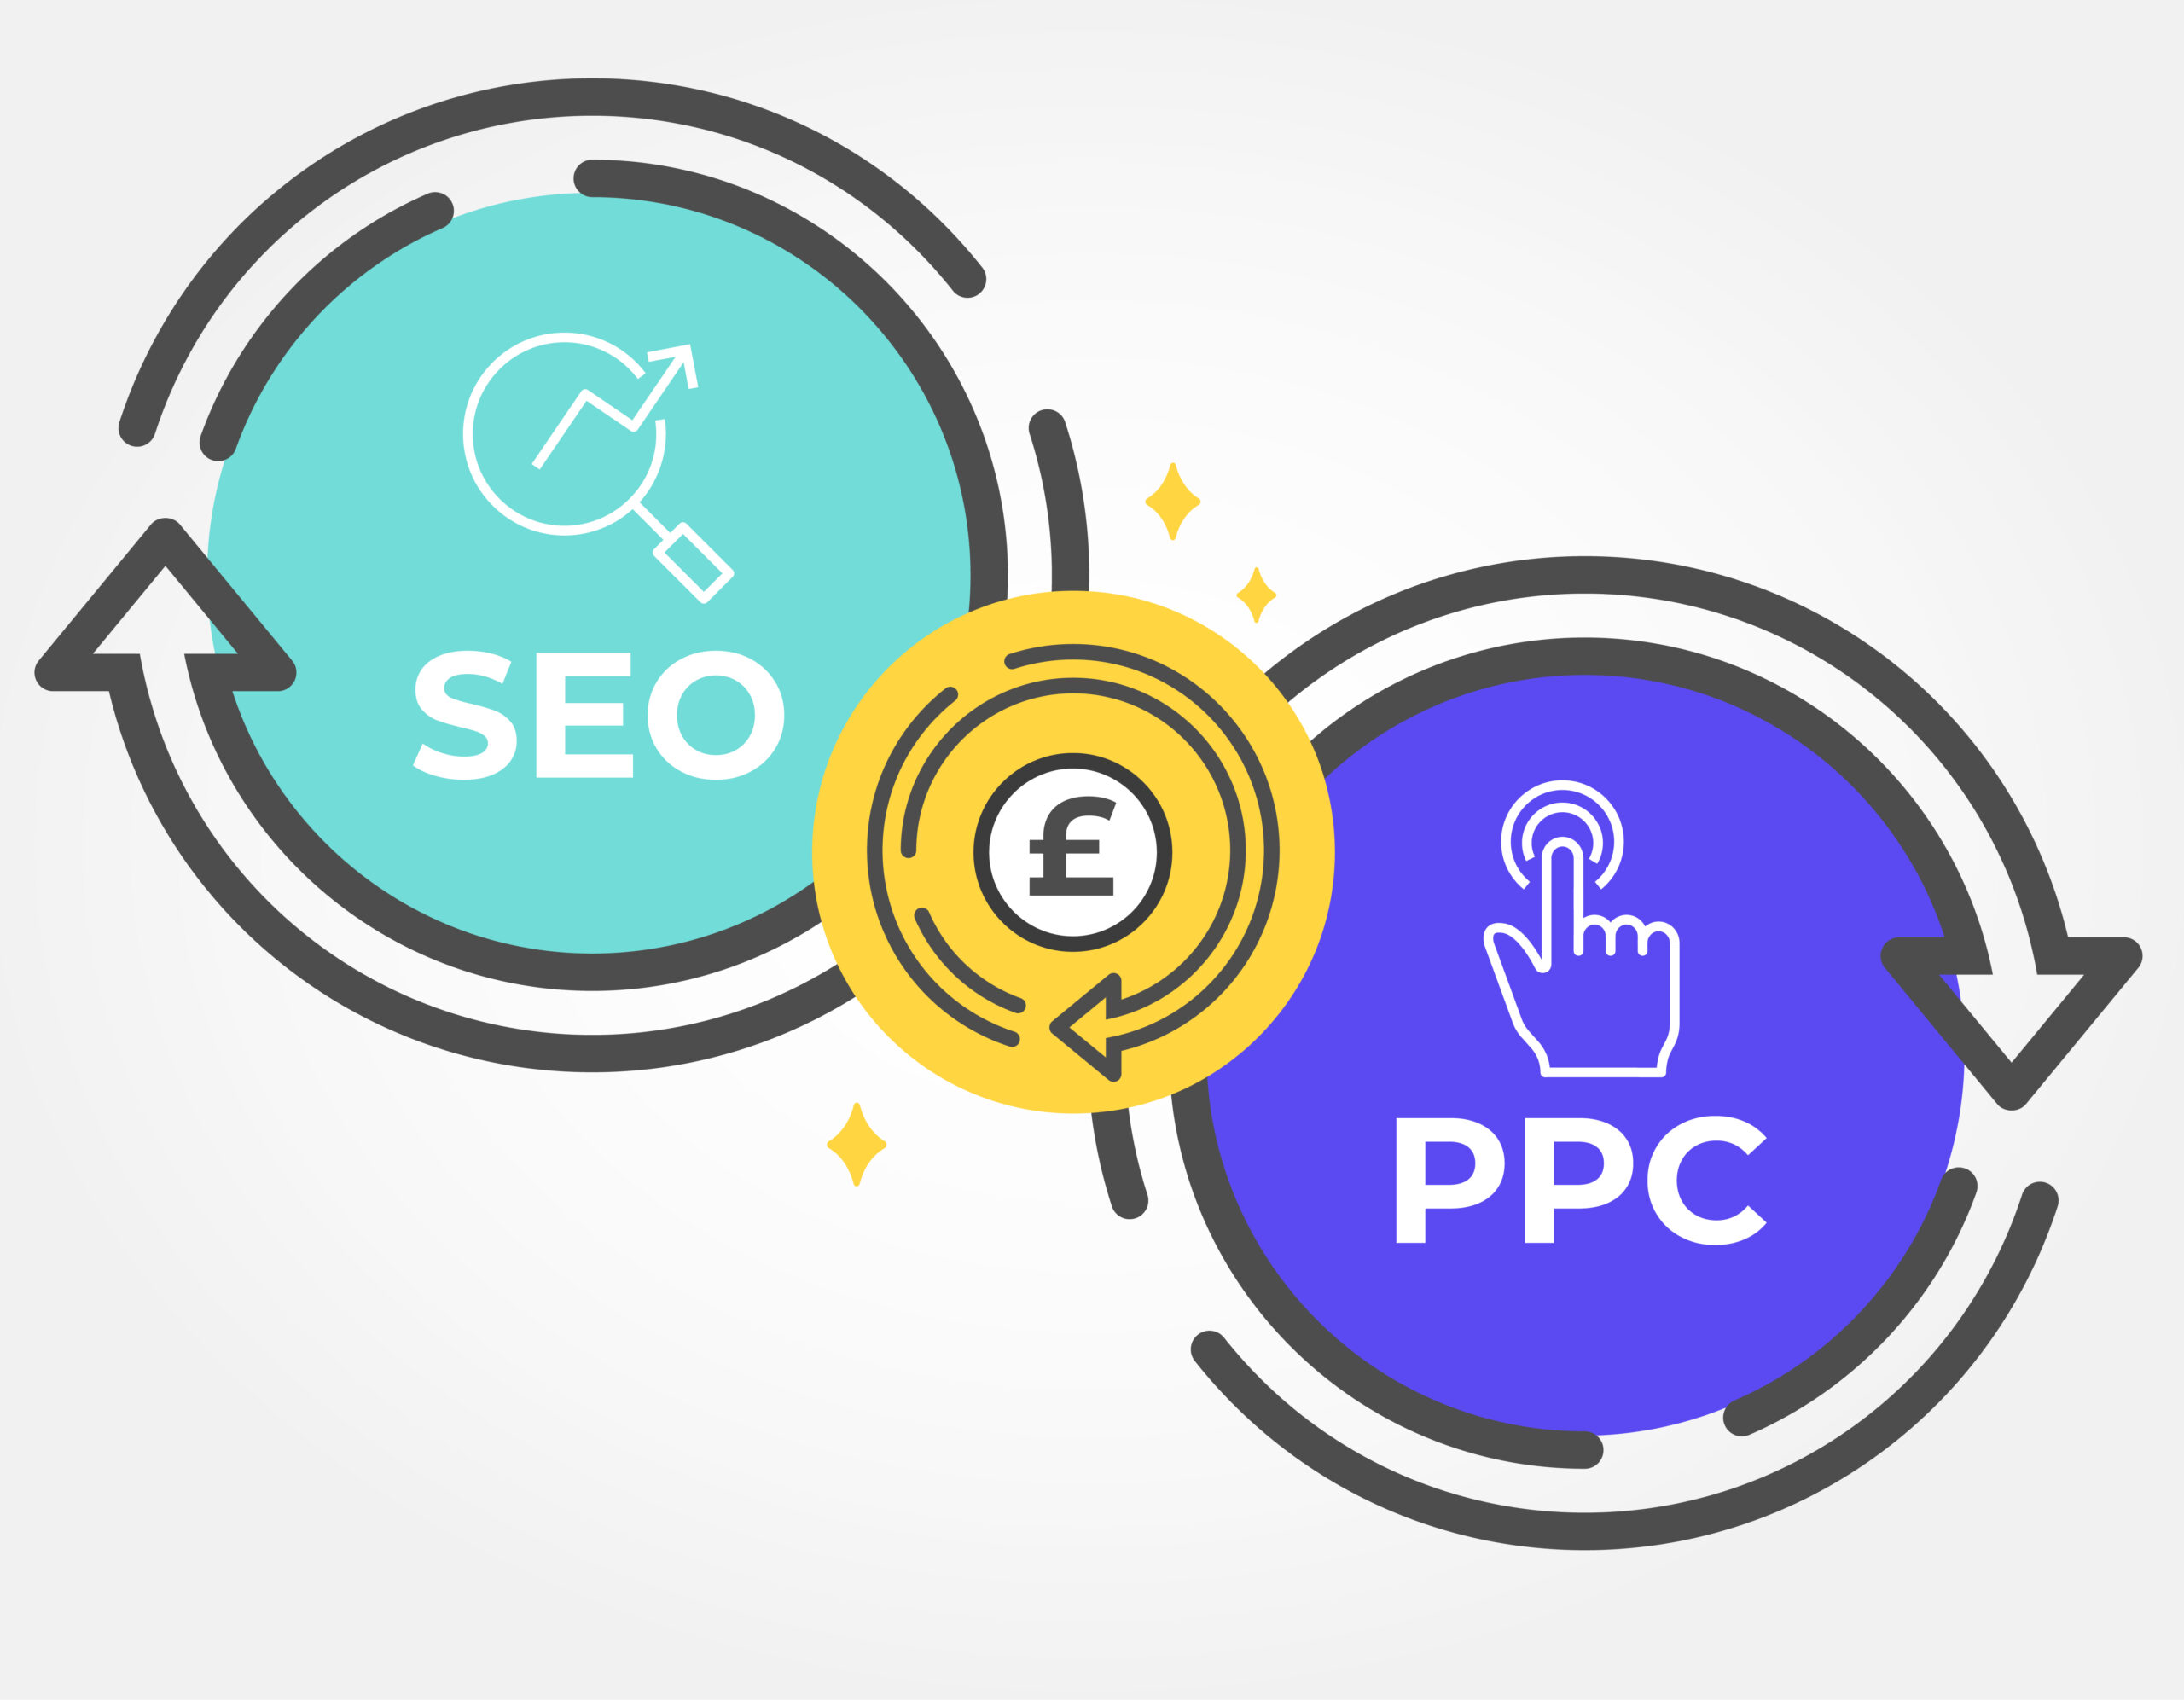 How much do SEO and PPC cost?